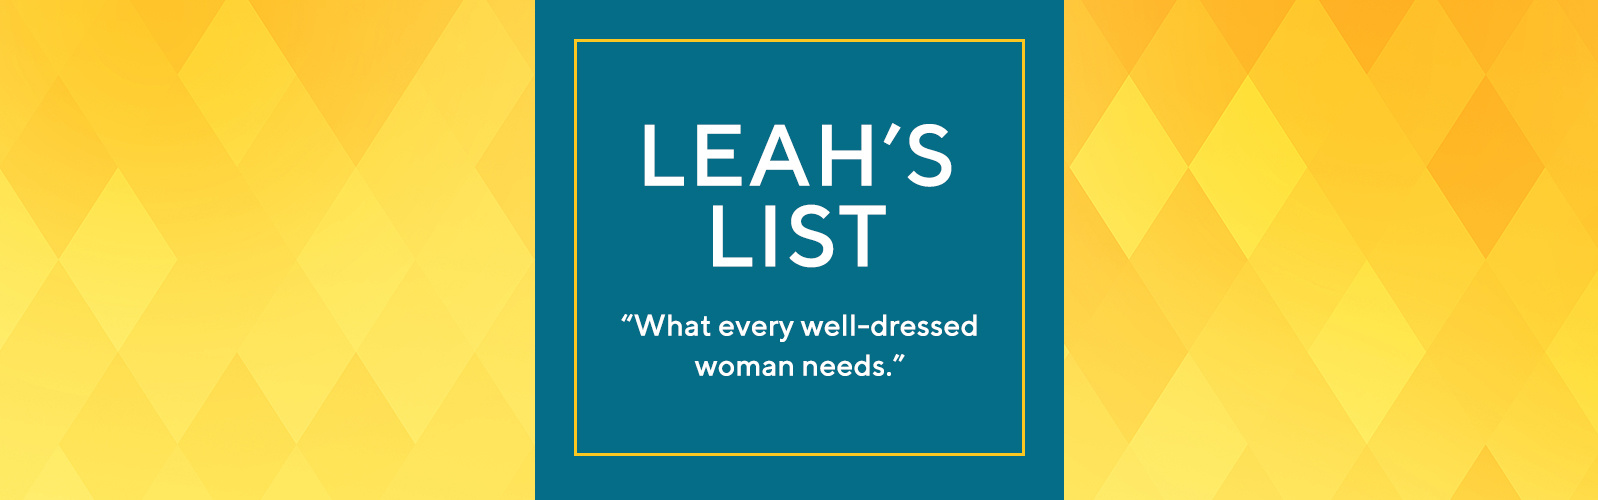 Leah's List "What every well-dressed woman needs."